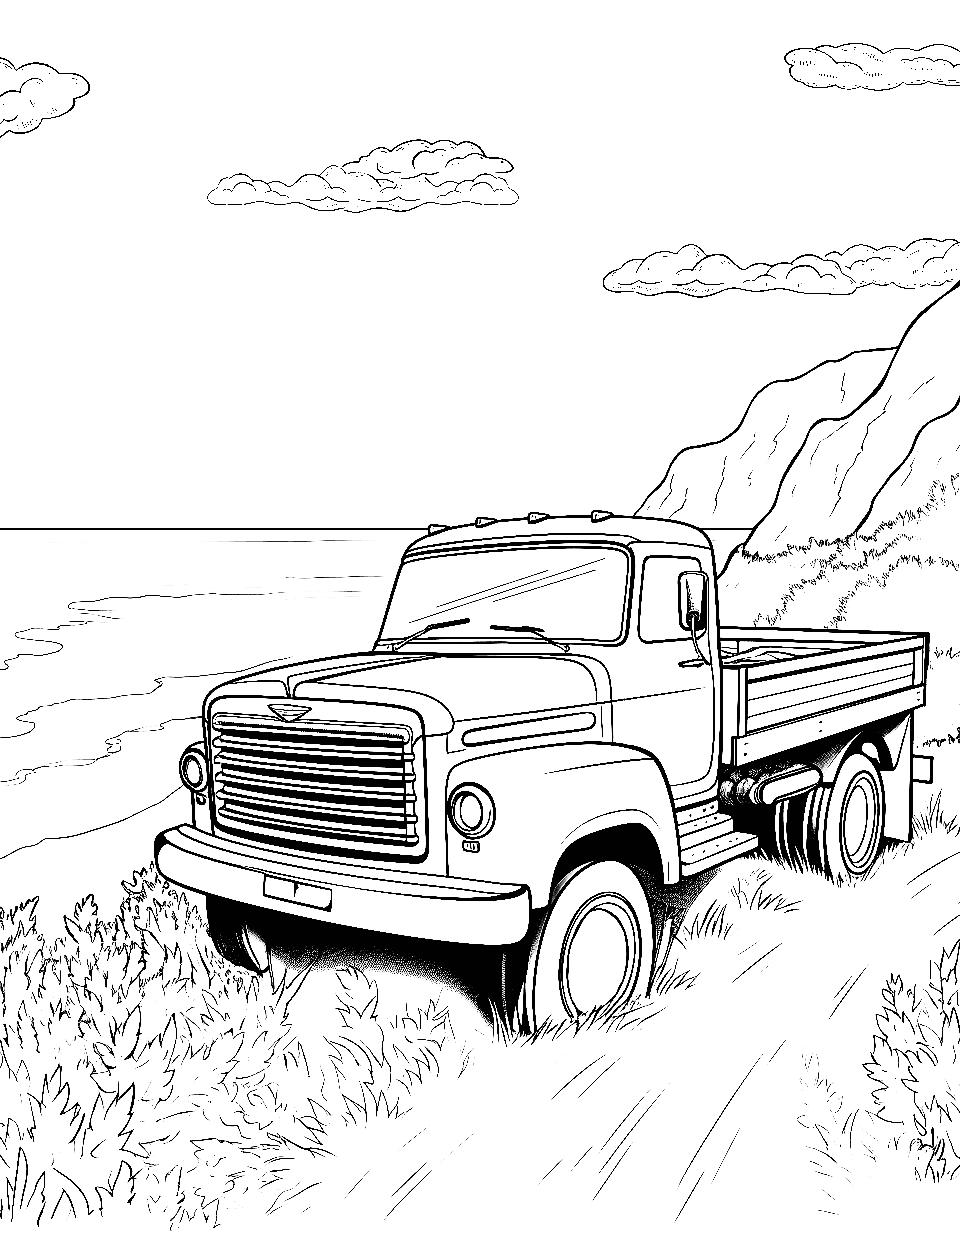 Ocean Front View Coloring Page - A truck parked on a gentle cliff overlooking a calm ocean.